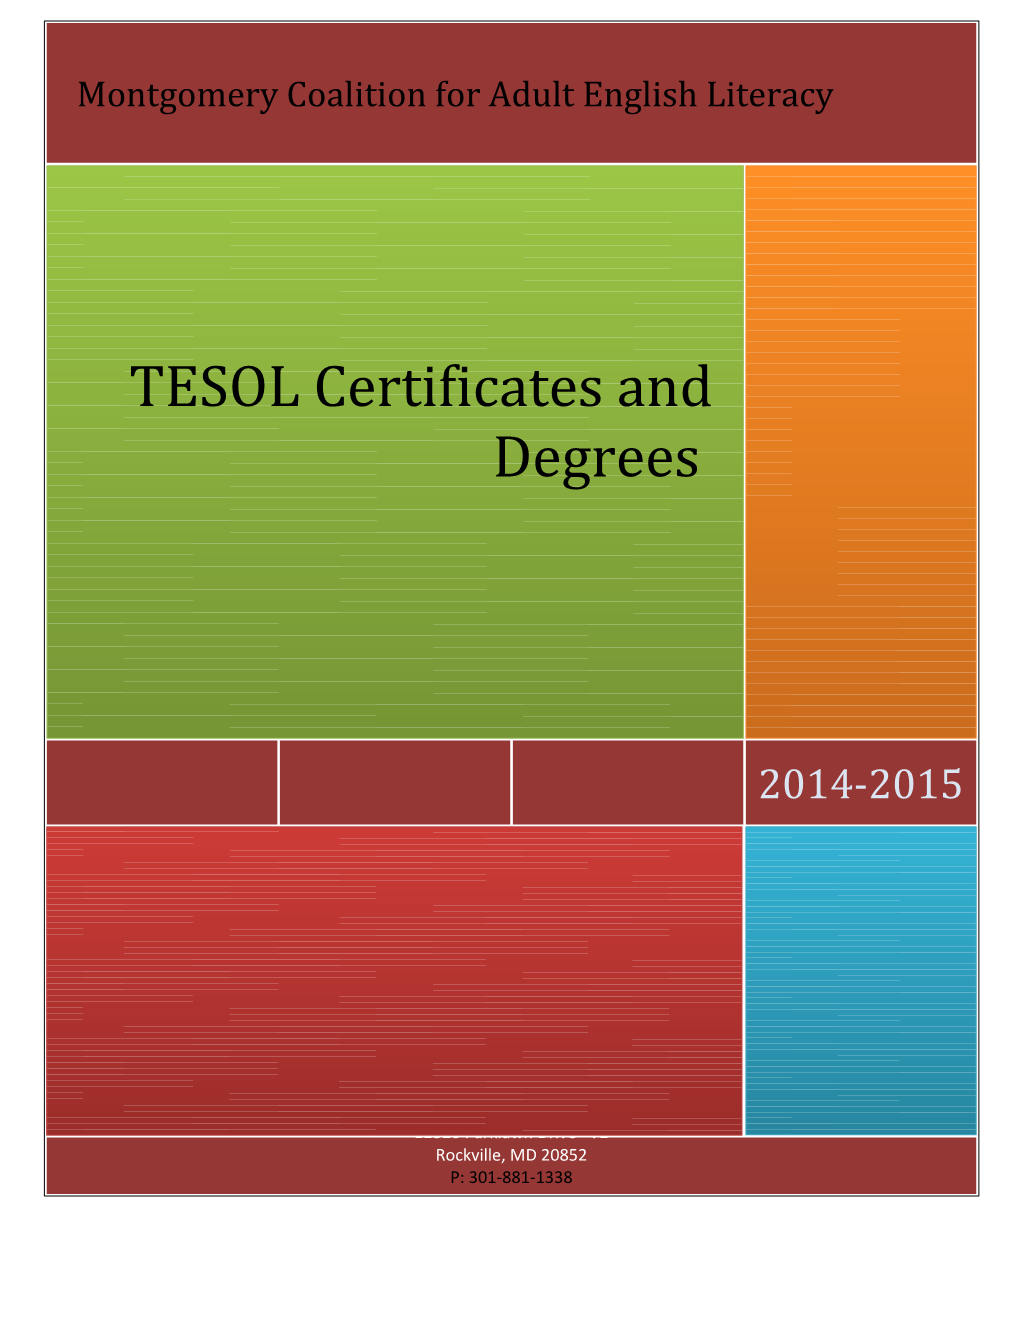 TESOL Certificates and Degrees